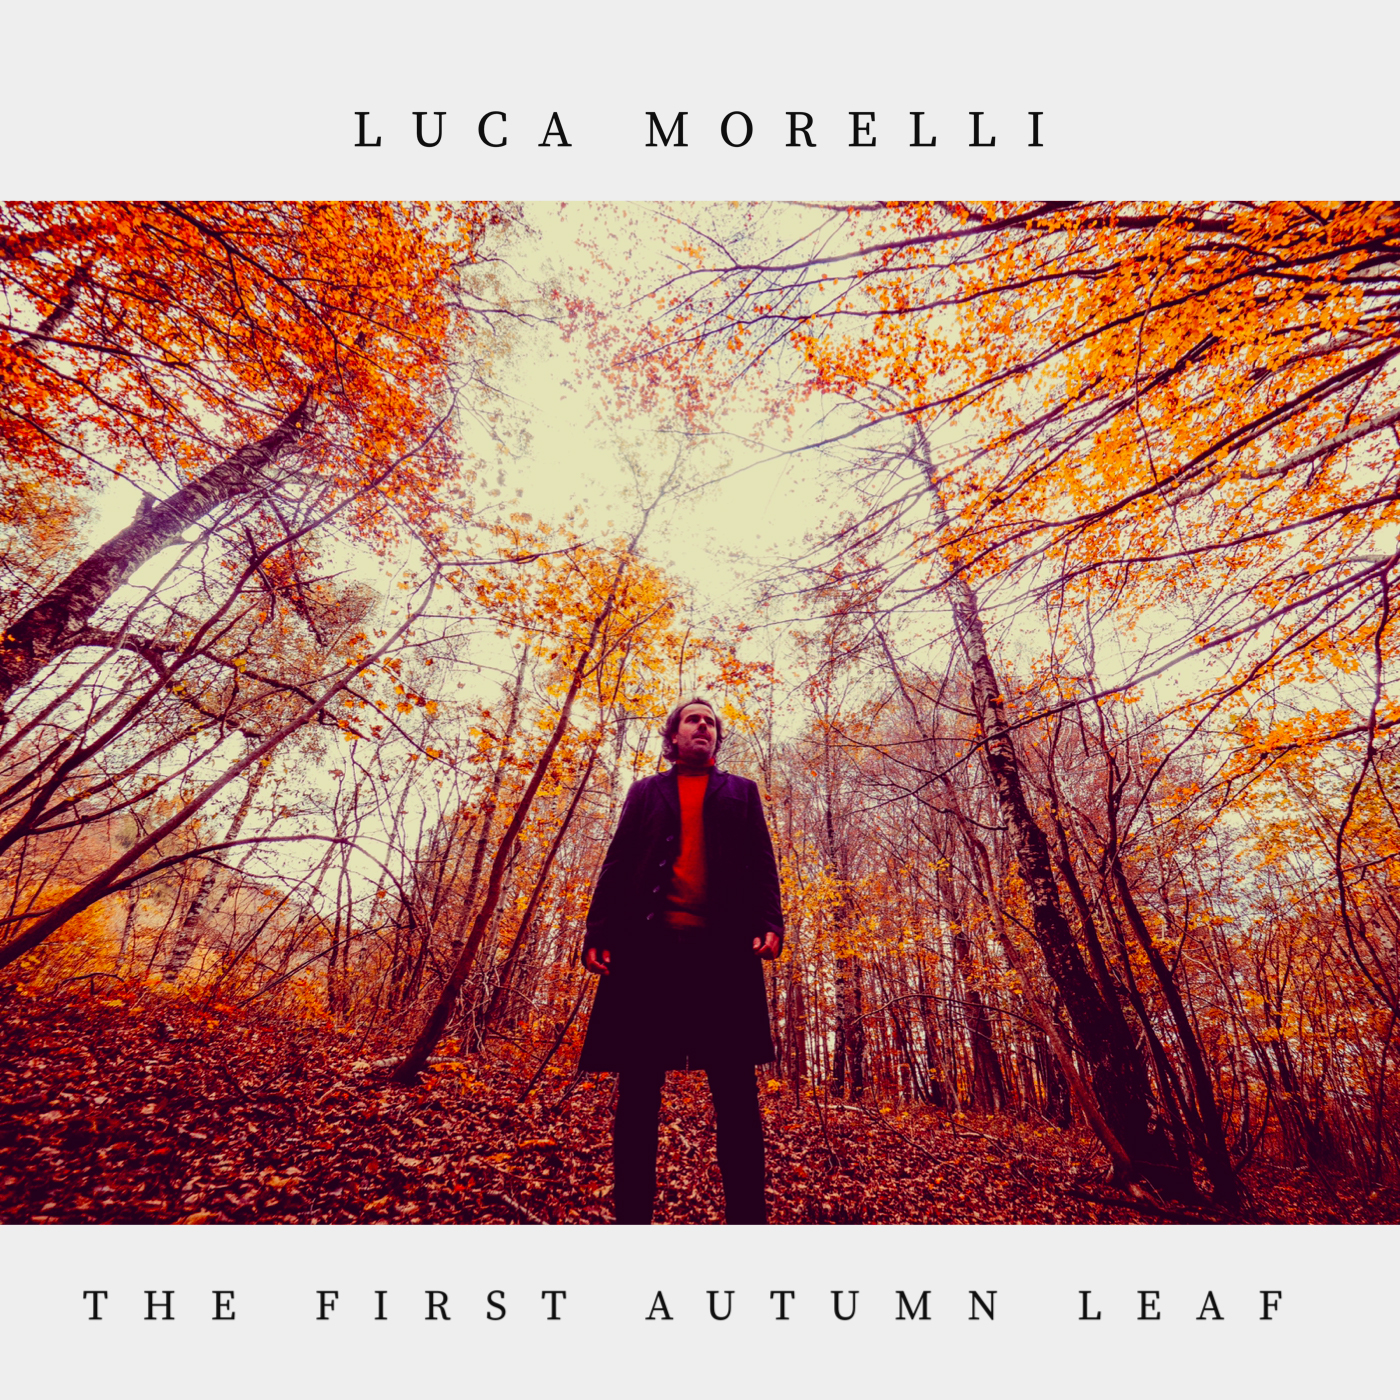 The First Autumn Leaf